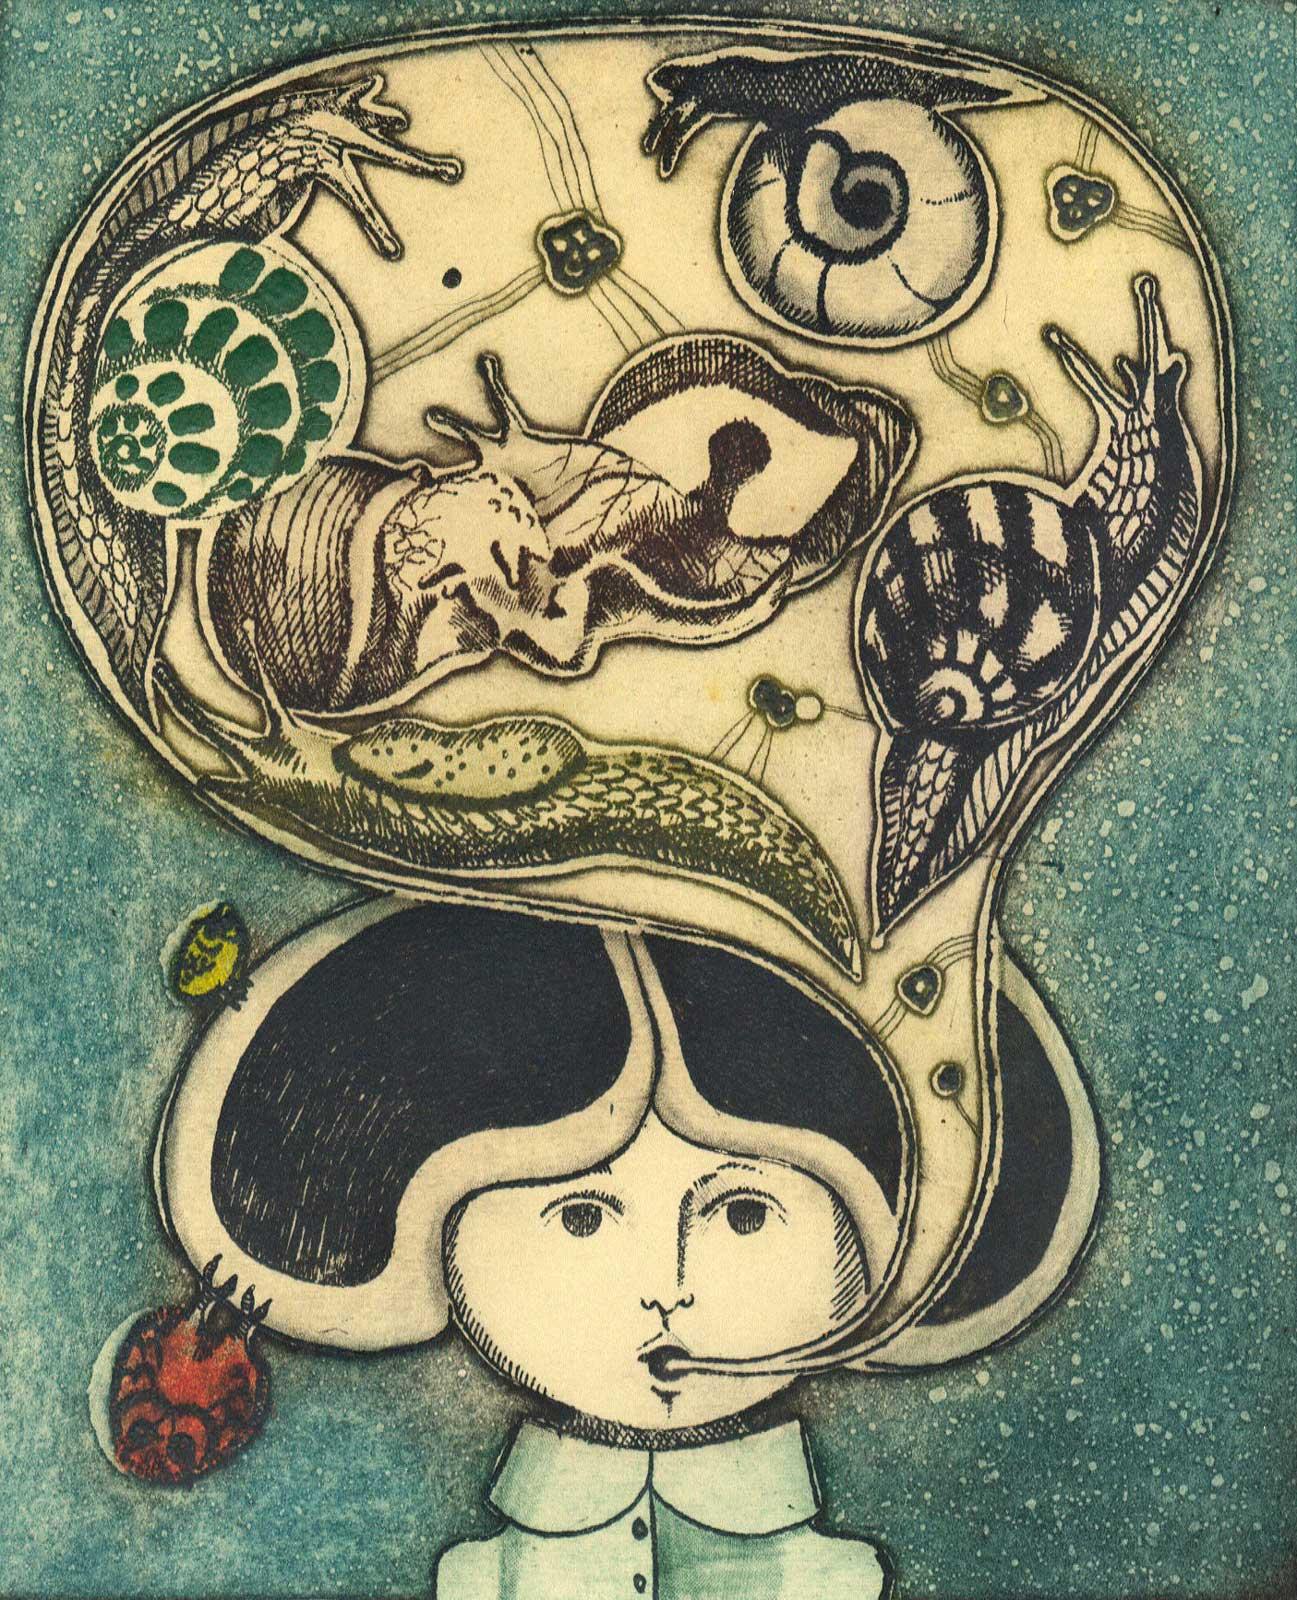 Leticia Tarragó Figurative Print - Caracoles - In Spanish this refers to snails and the dreams of this Mexican girl